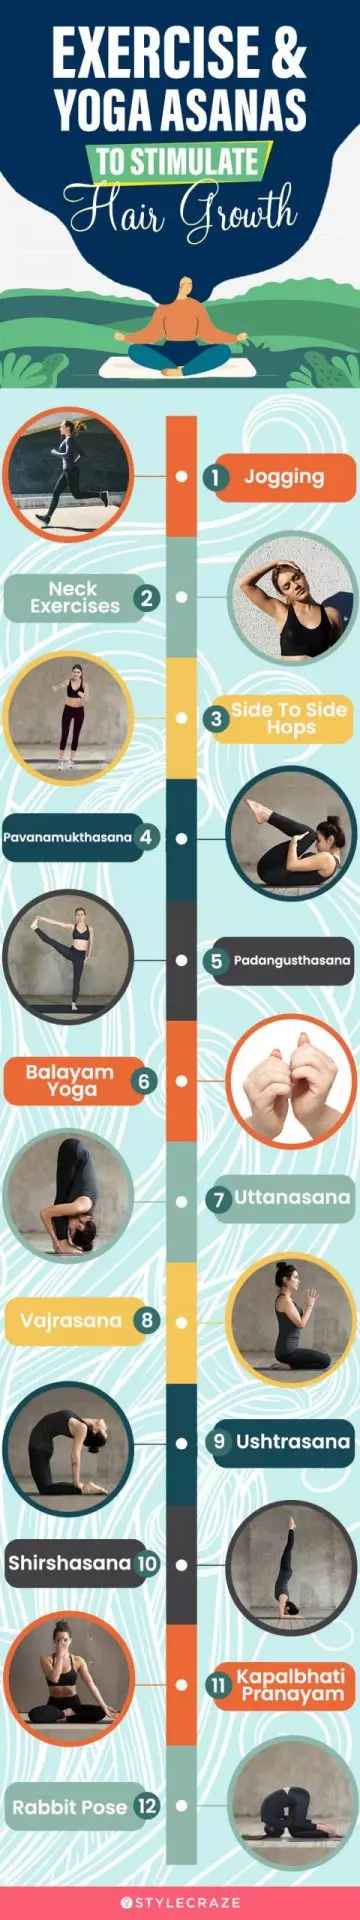 exercise & yoga asanas to stimulate hair growth (infographic)